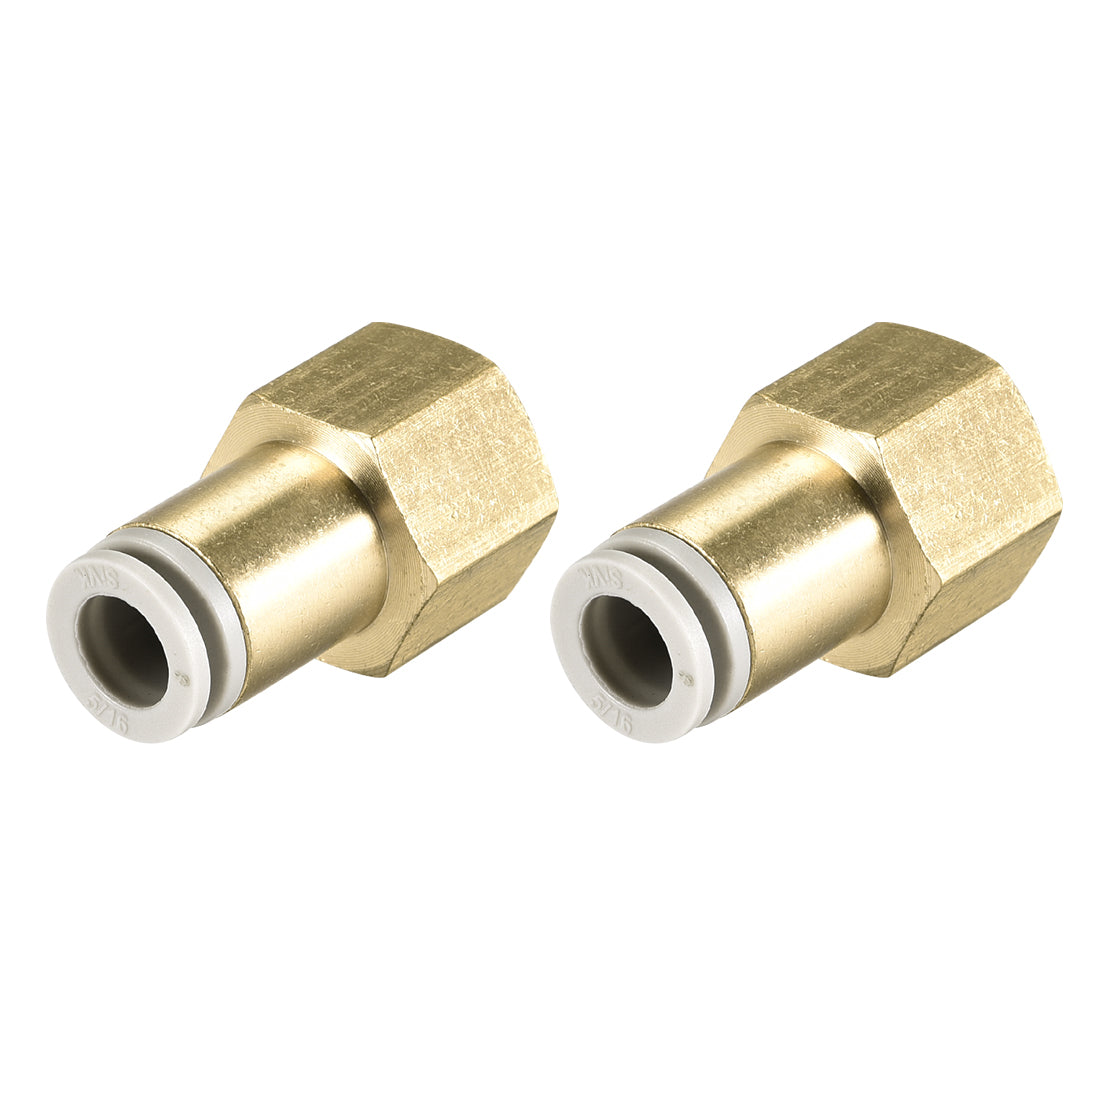 uxcell Uxcell Push to Connect Tube Fittings 8mm Tube OD x 3/8 PT Female Golden Tone 2Pcs